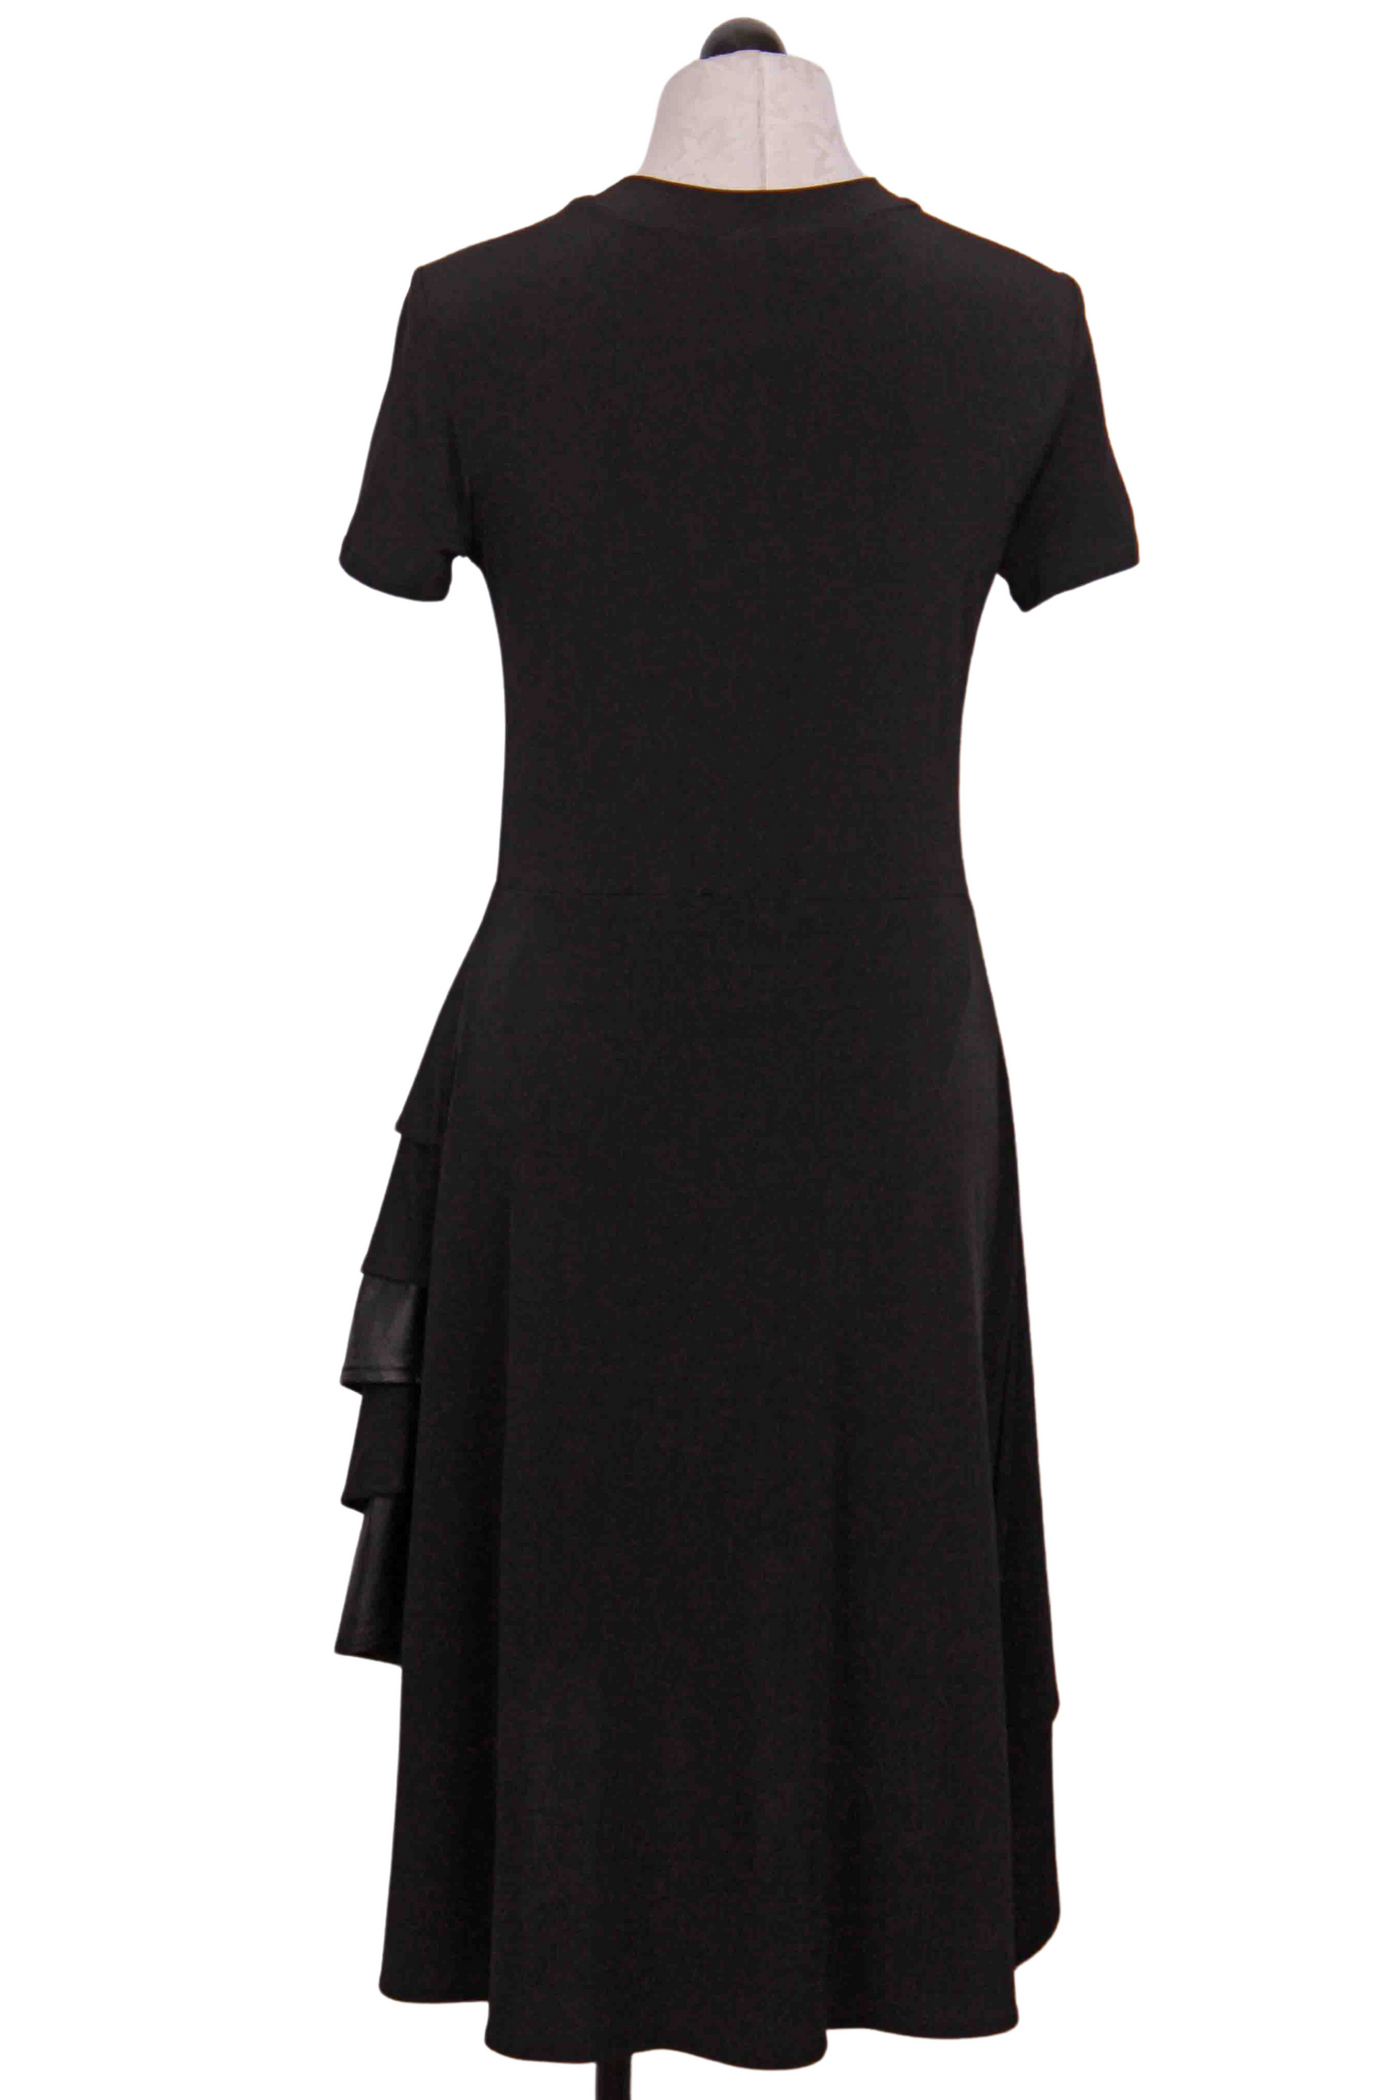 back view of Black Drake Dress by Kozan with curved ruffle hem